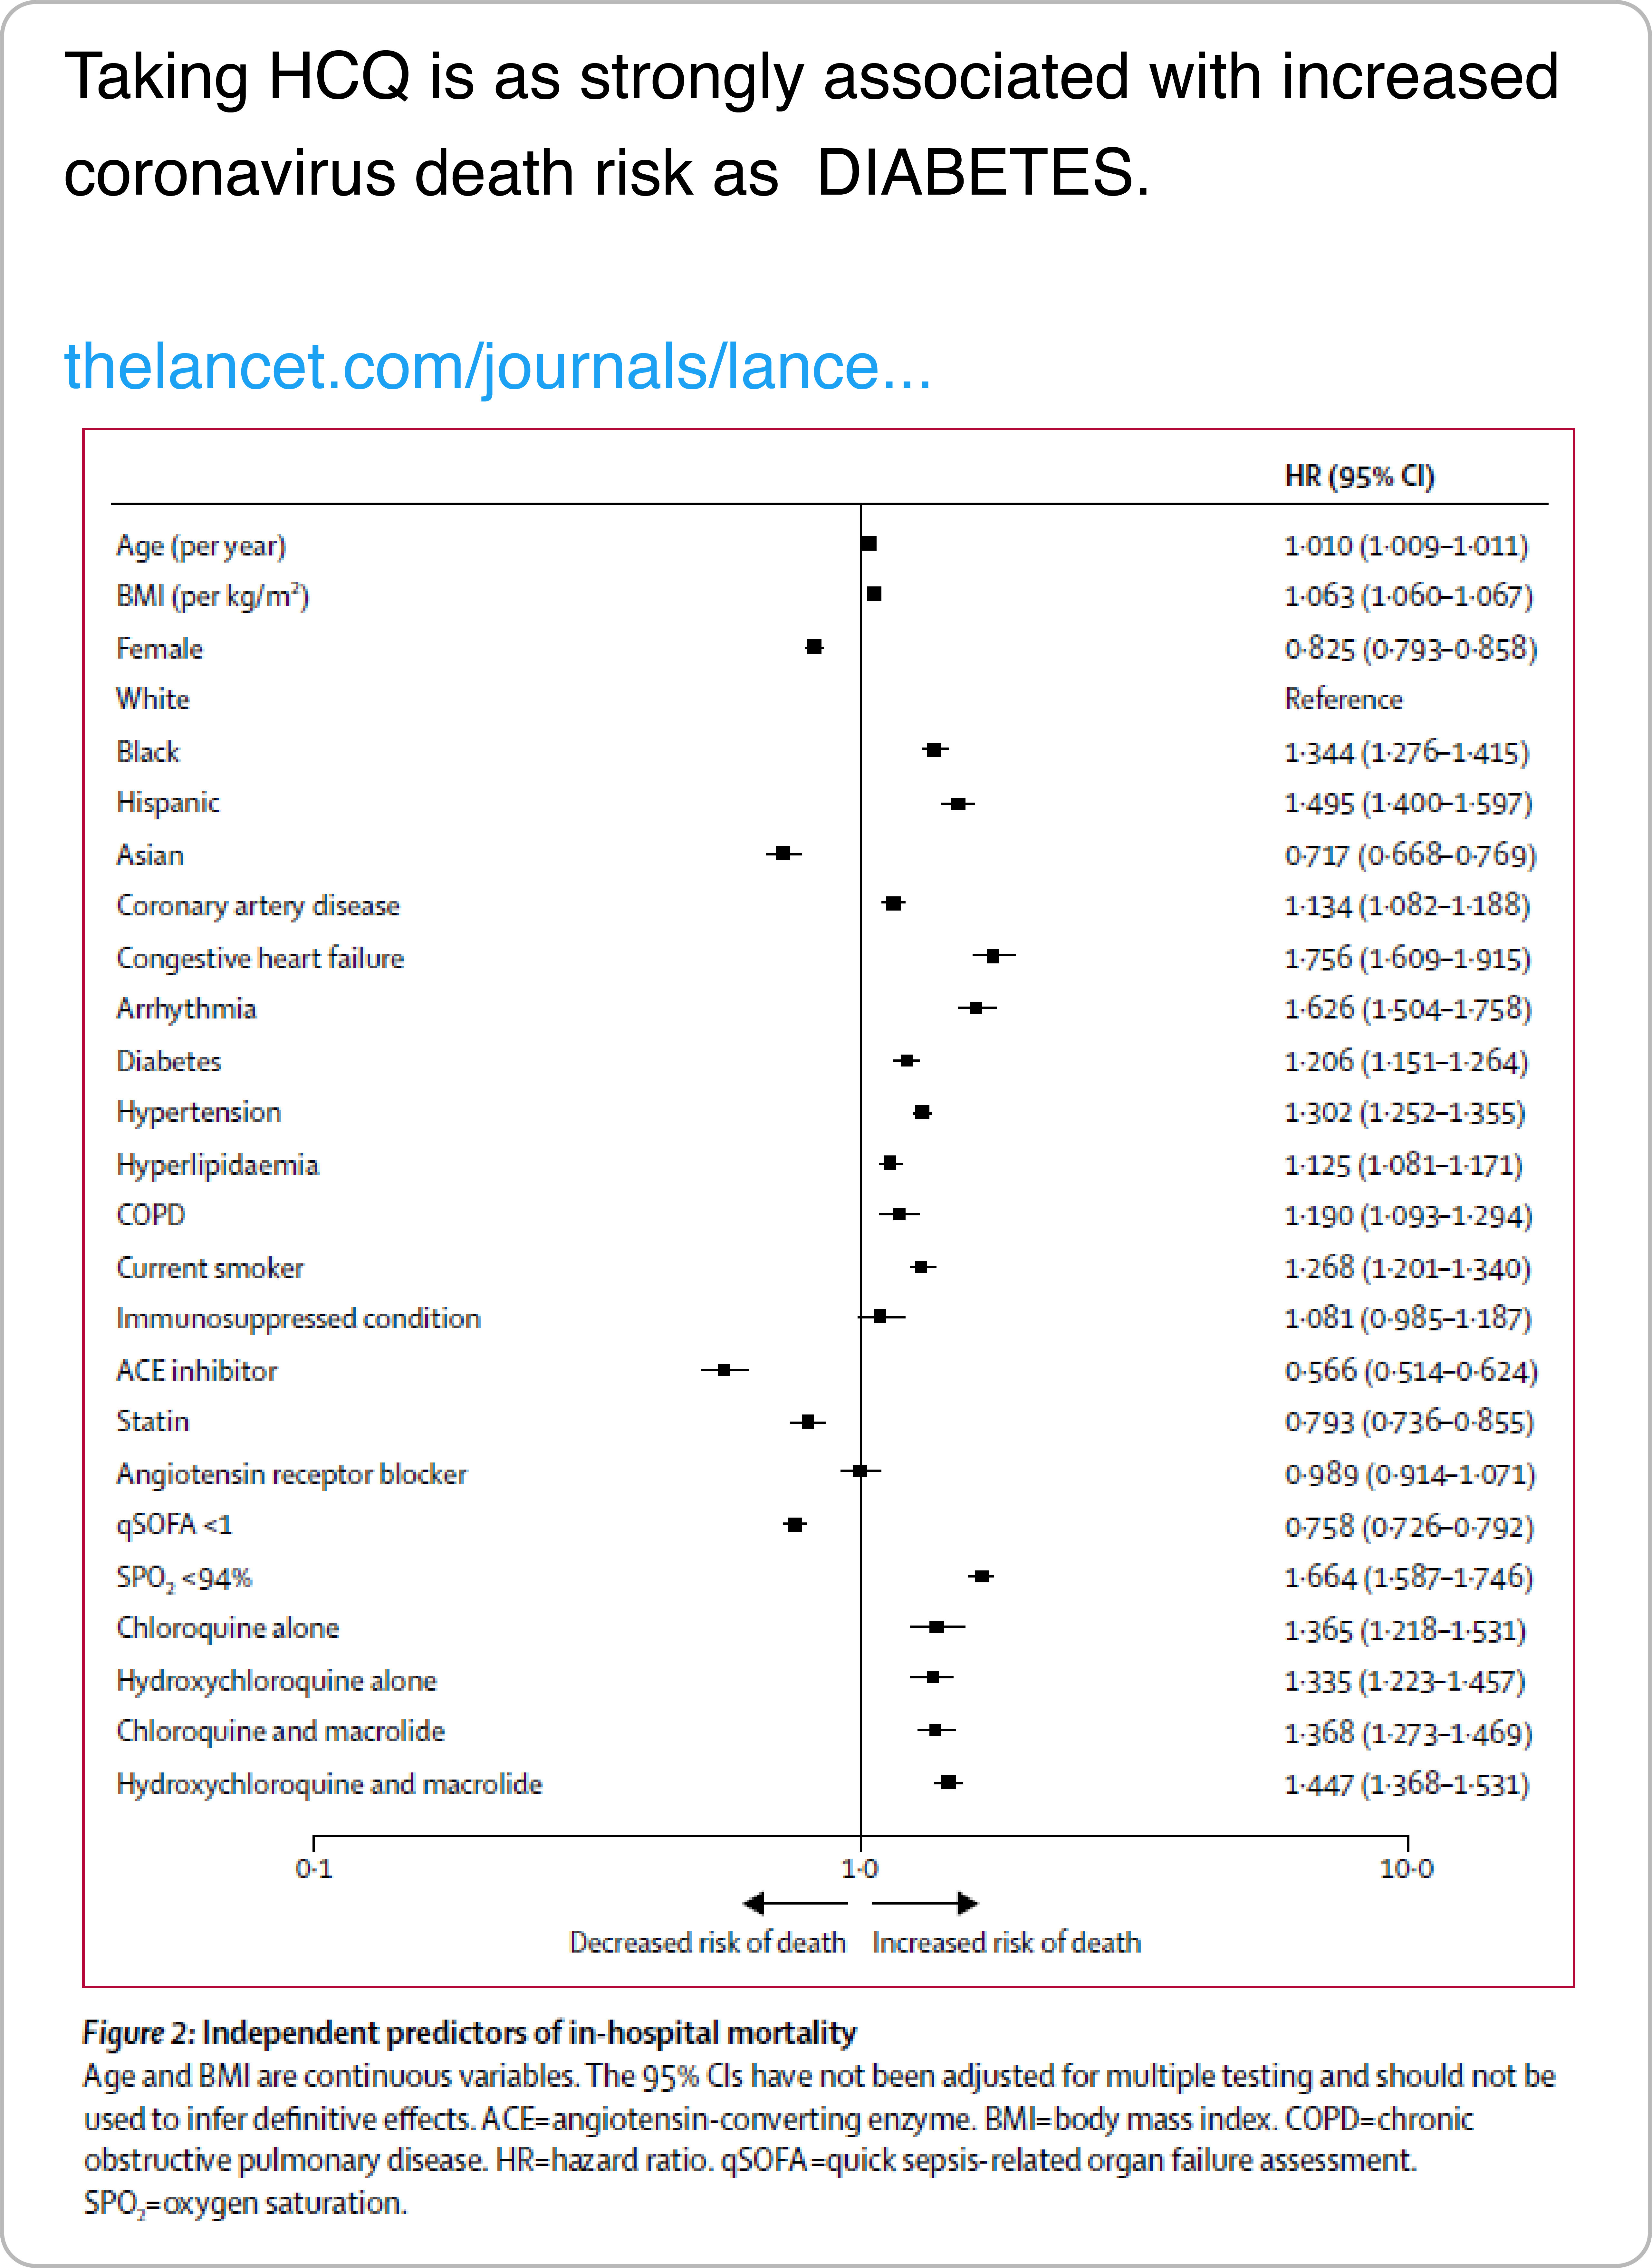 Screenshot of a tweet.  
The caption says: Taking HCQ is as strongly associated with increased coronavirus death risk as diabetes, and links to the Lancet journal. The attached chart is titled Independent predictors of in-hospital mortality, and shows 95% confidence intervals of effect of different variables on risk of death, with hydroxychloroquine having a statistically significant positive effect on risk of death, similar to diabetes and other medical conditions.
